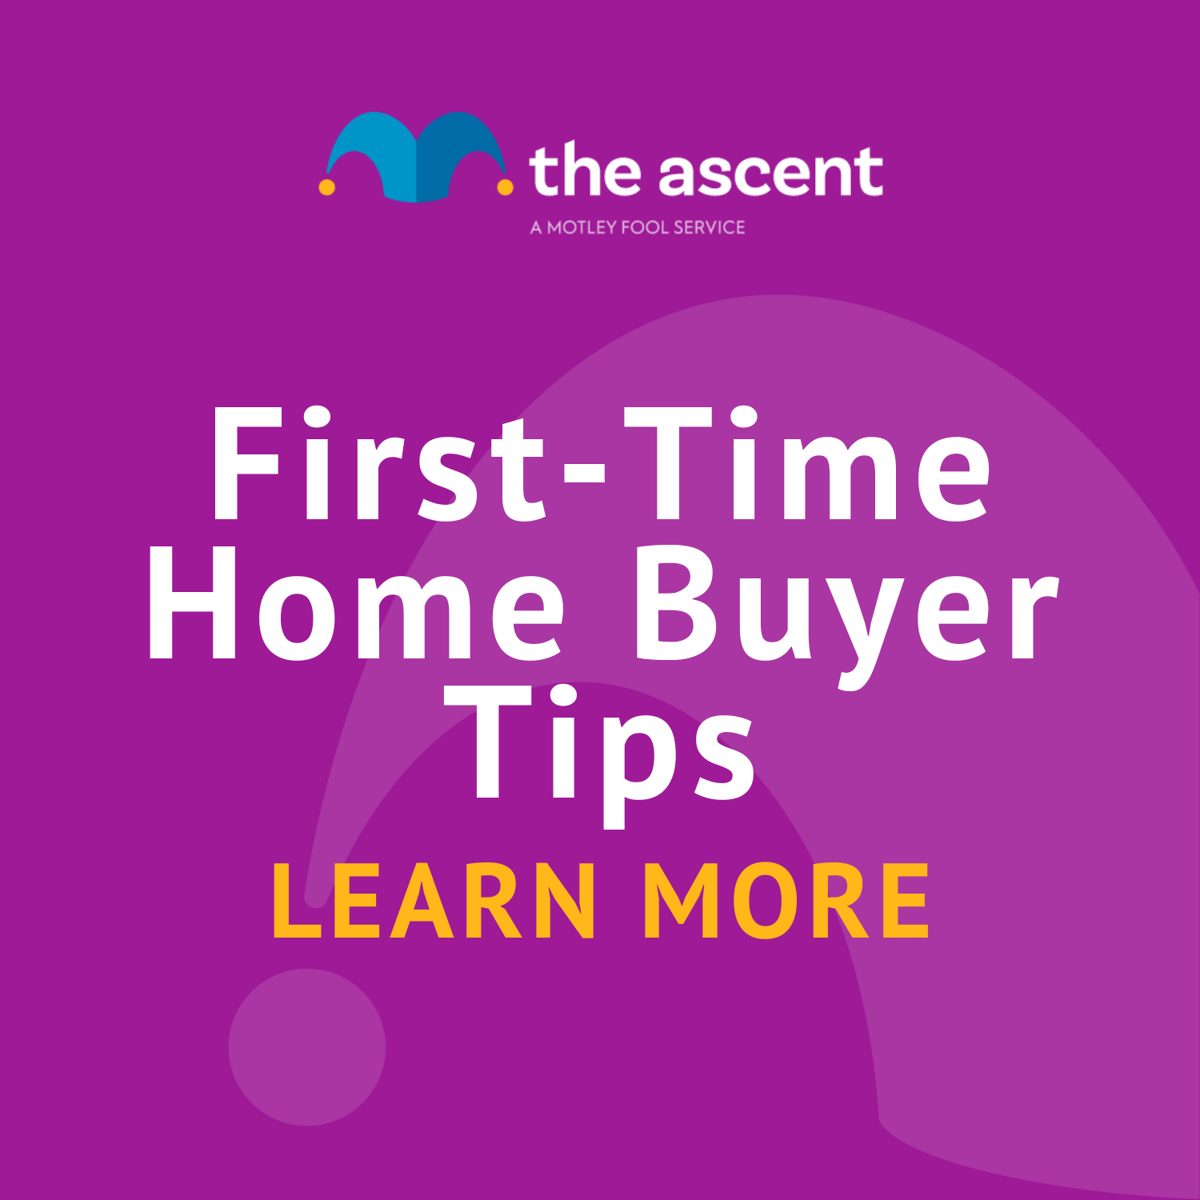 An Agent's Guide: Must have tips for first-time homebuyers and